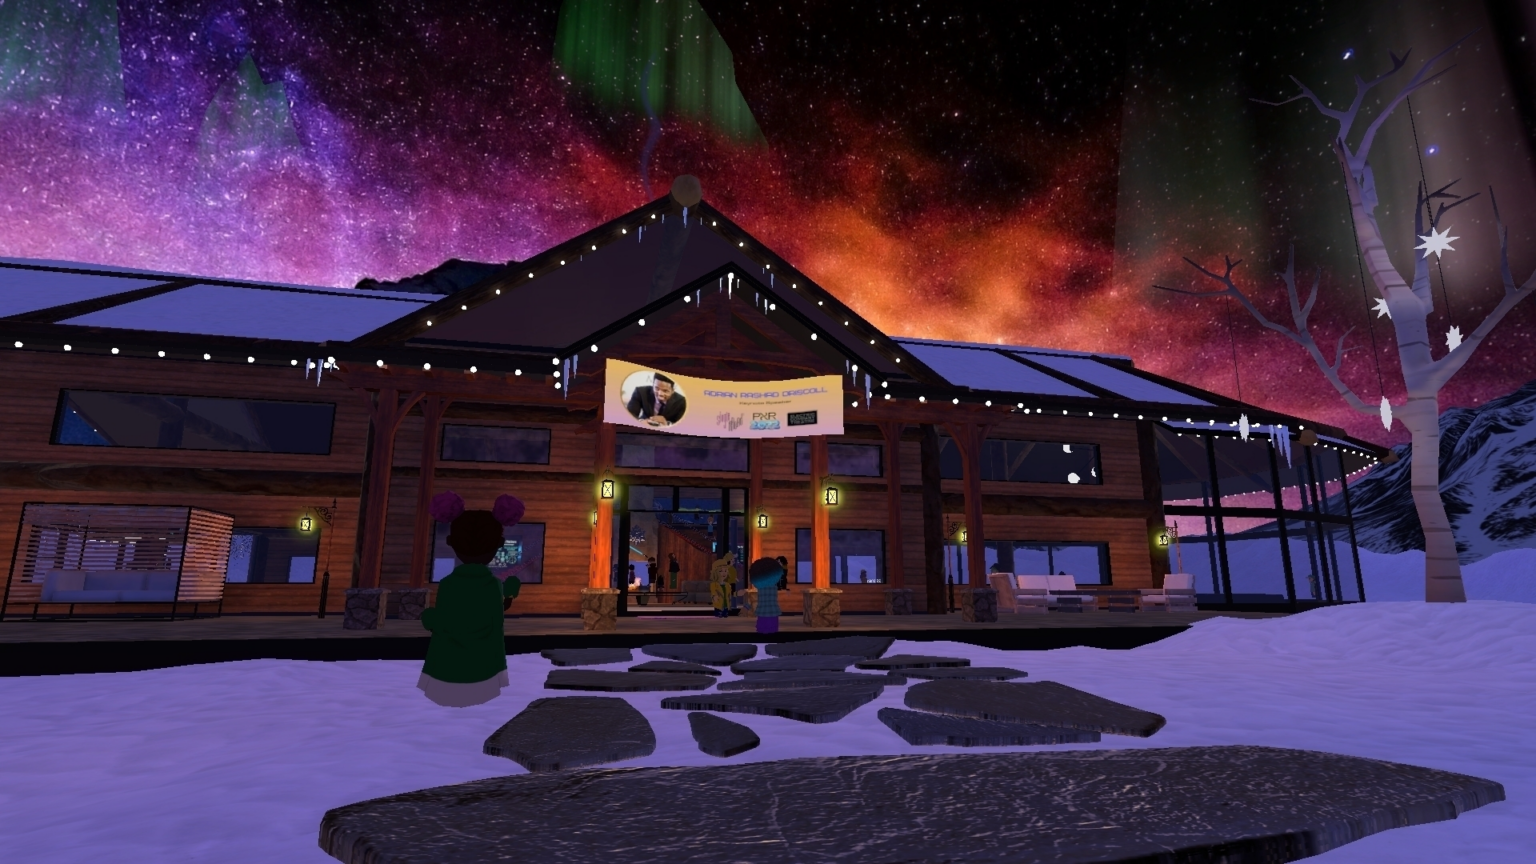 Virtual reality image of a cabin with a purple/pink/red sky behind it. The cabin is surrounded by snow.